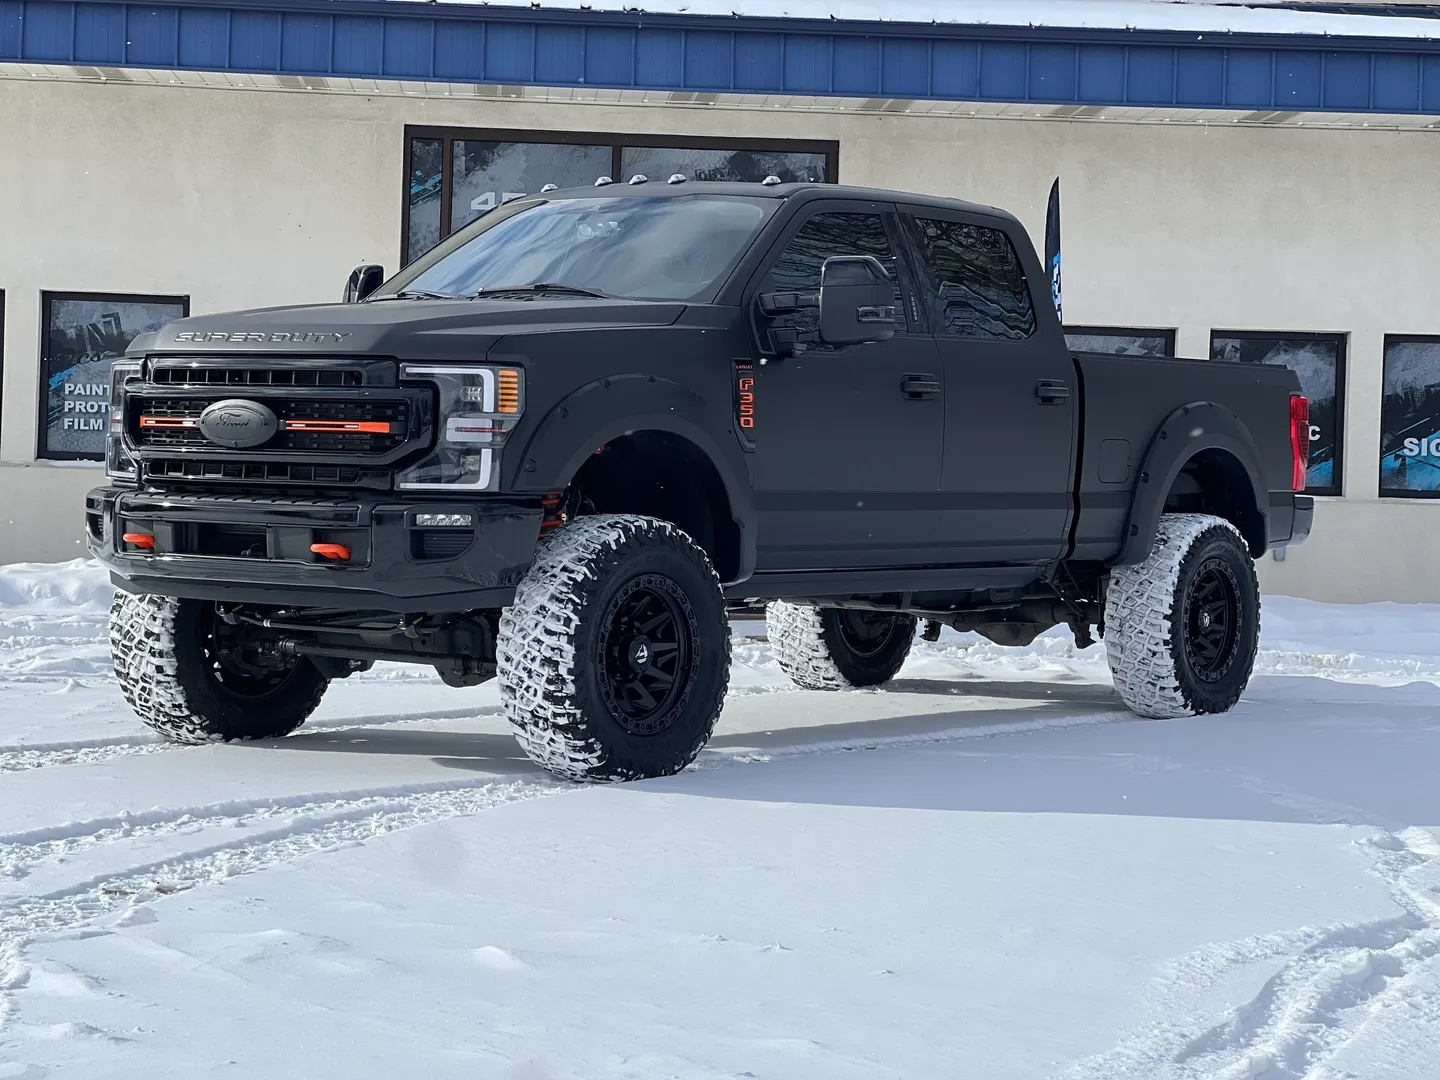 A black truck is parked in the snow.